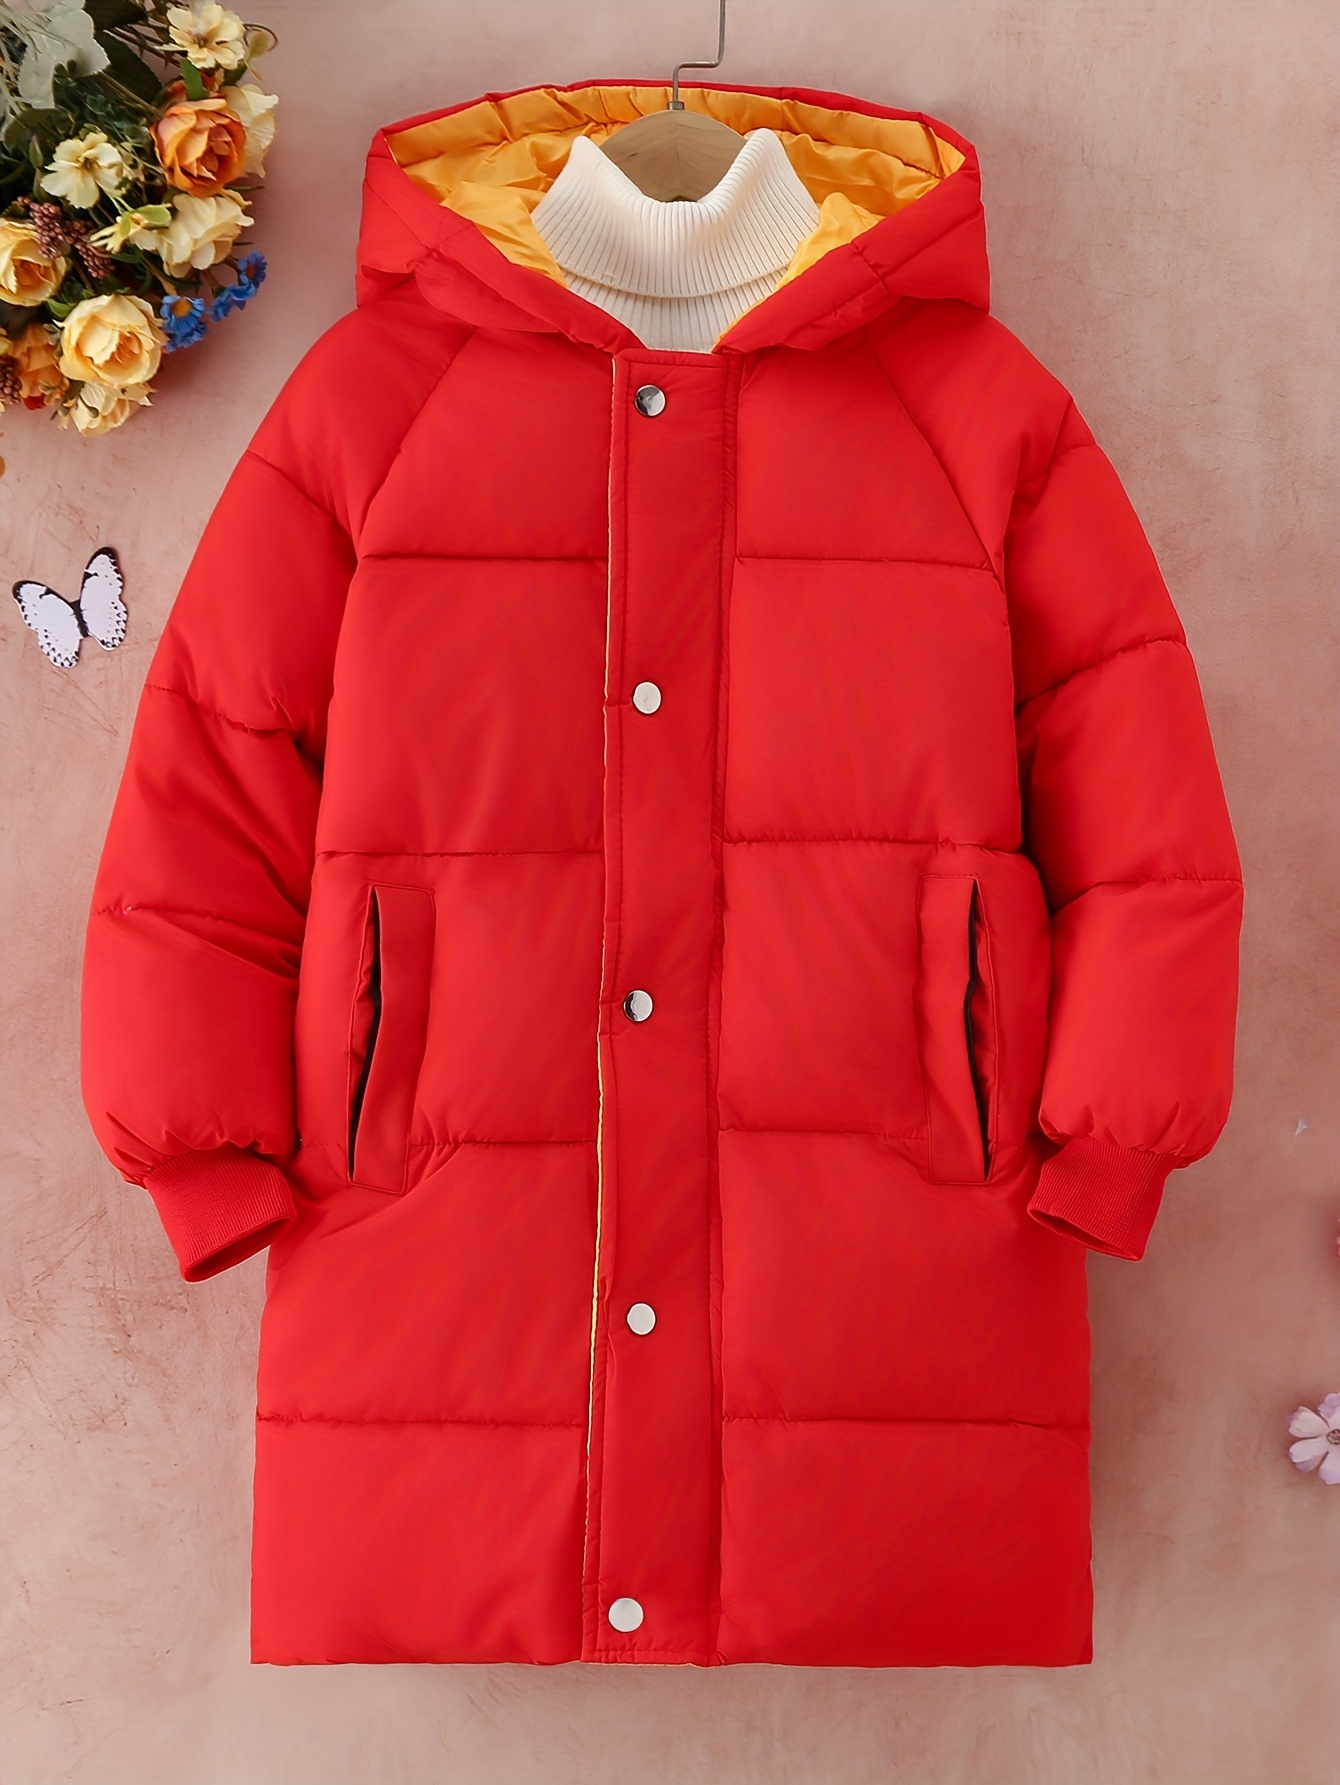 Kids' Outerwear - Girls & Boys Outdoor Clothing